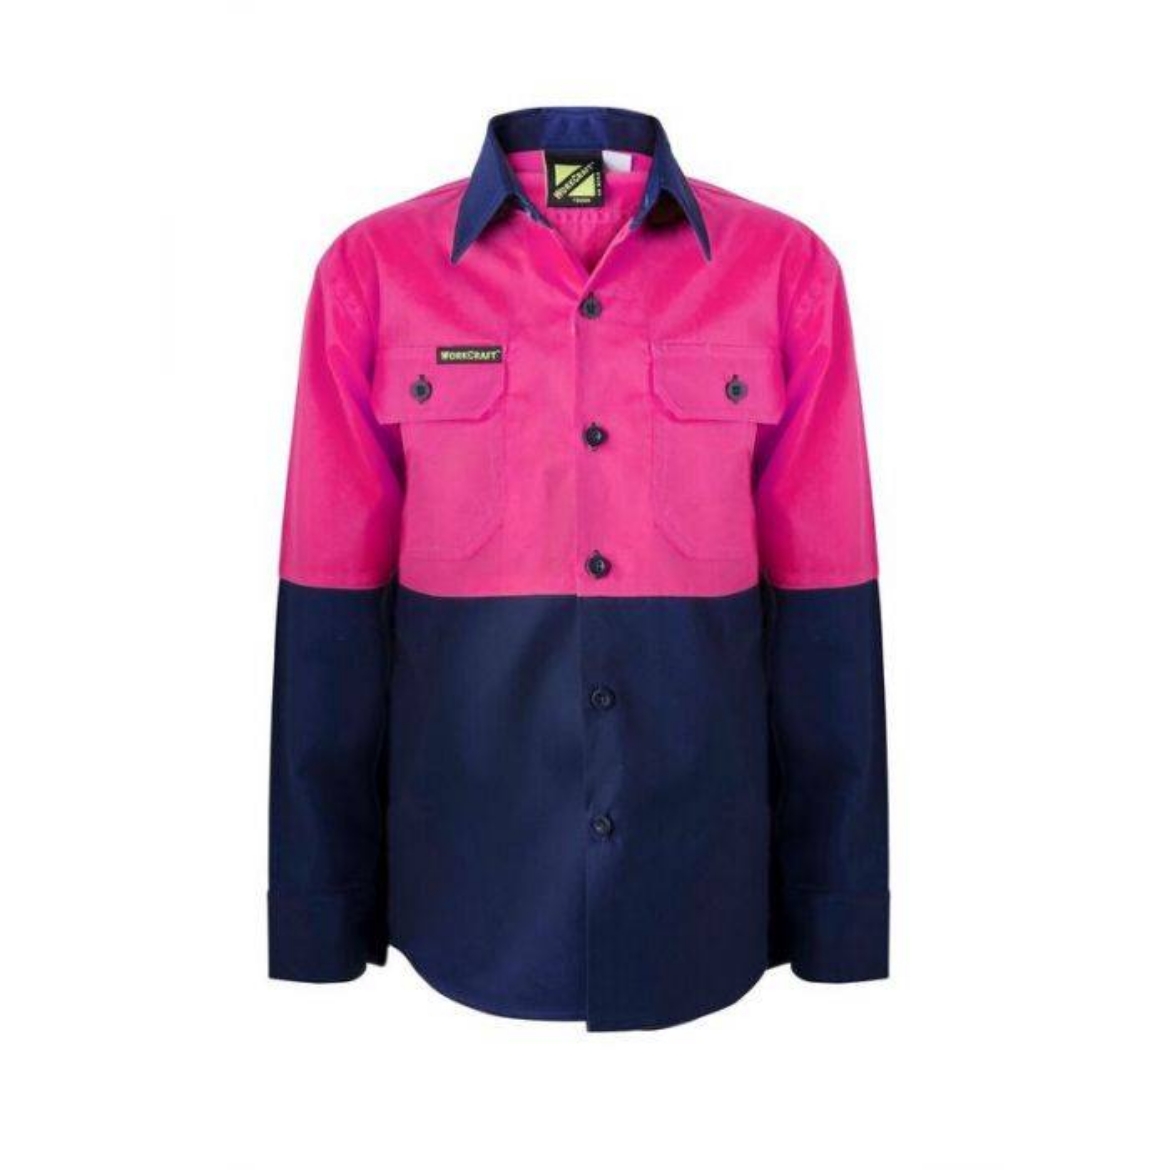 Picture of WorkCraft, Kids Lightweight Two Tone Long Sleeve Cotton Drill Shirt